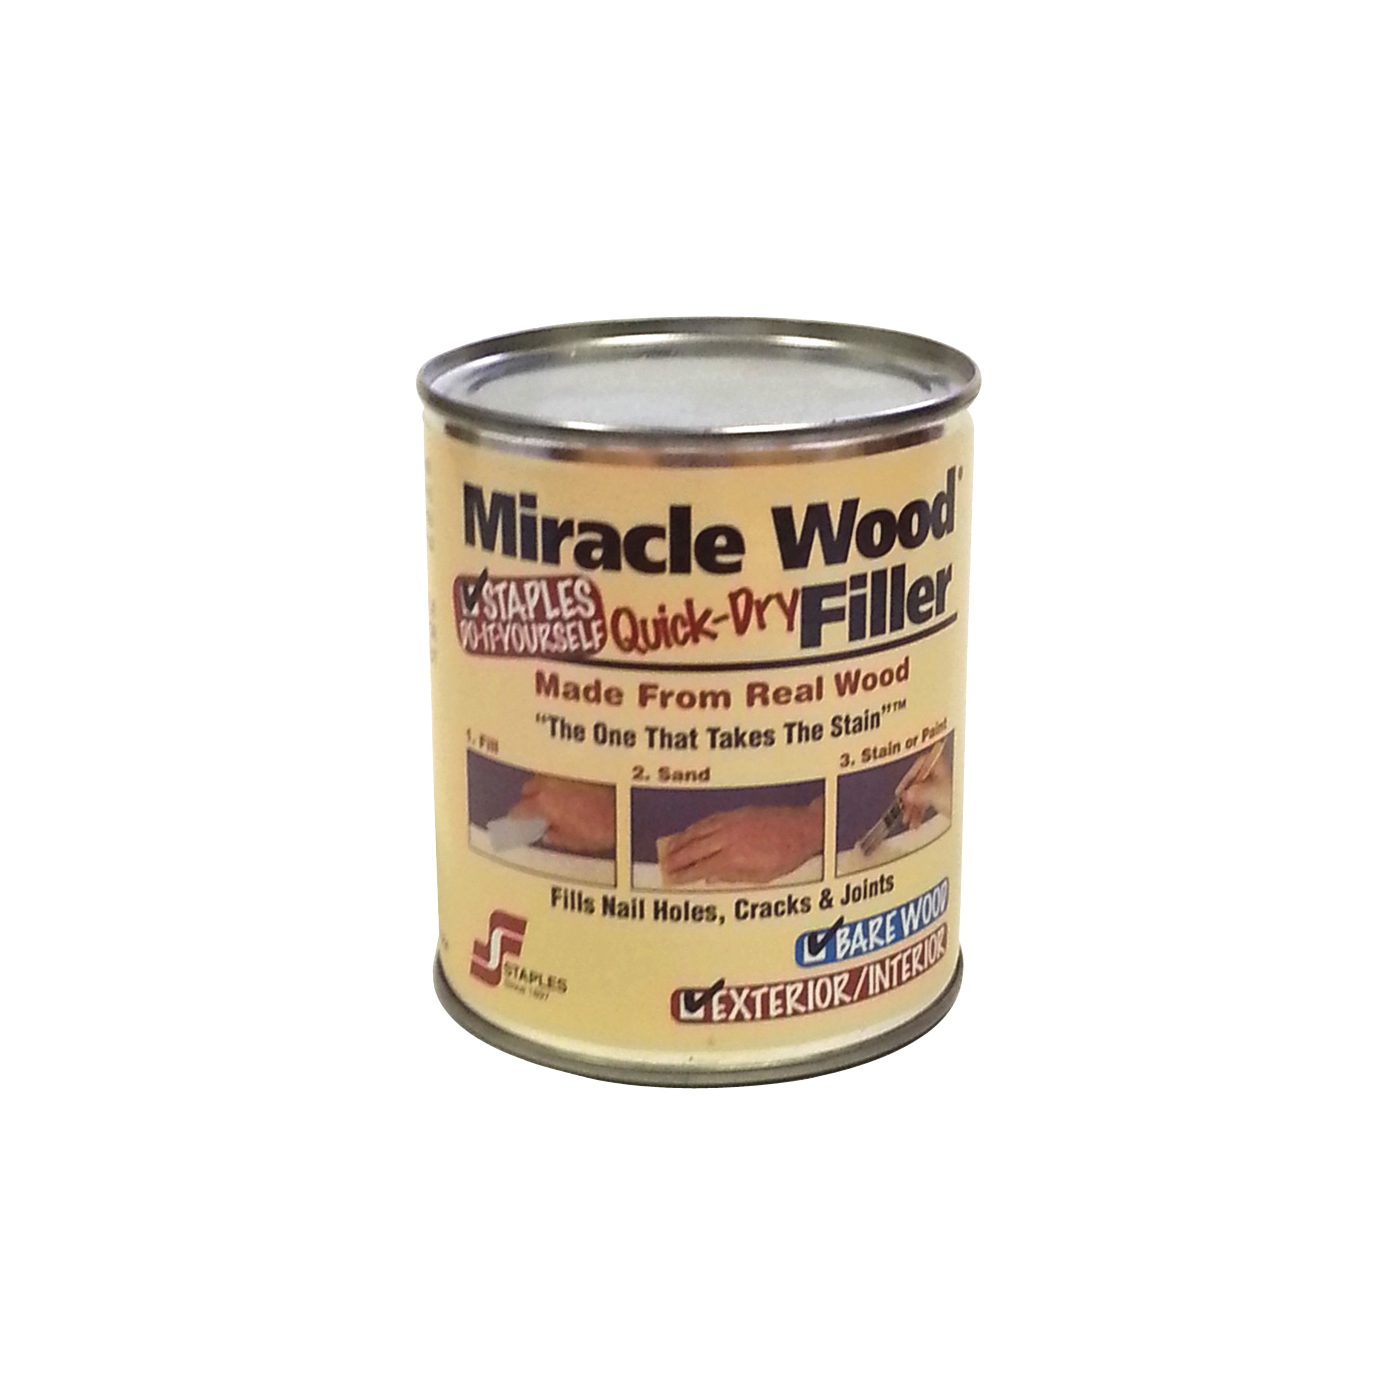 Staples Miracle Wood 903 Wood Filler, Putty, Strong Solvent, Natural, 1 lb